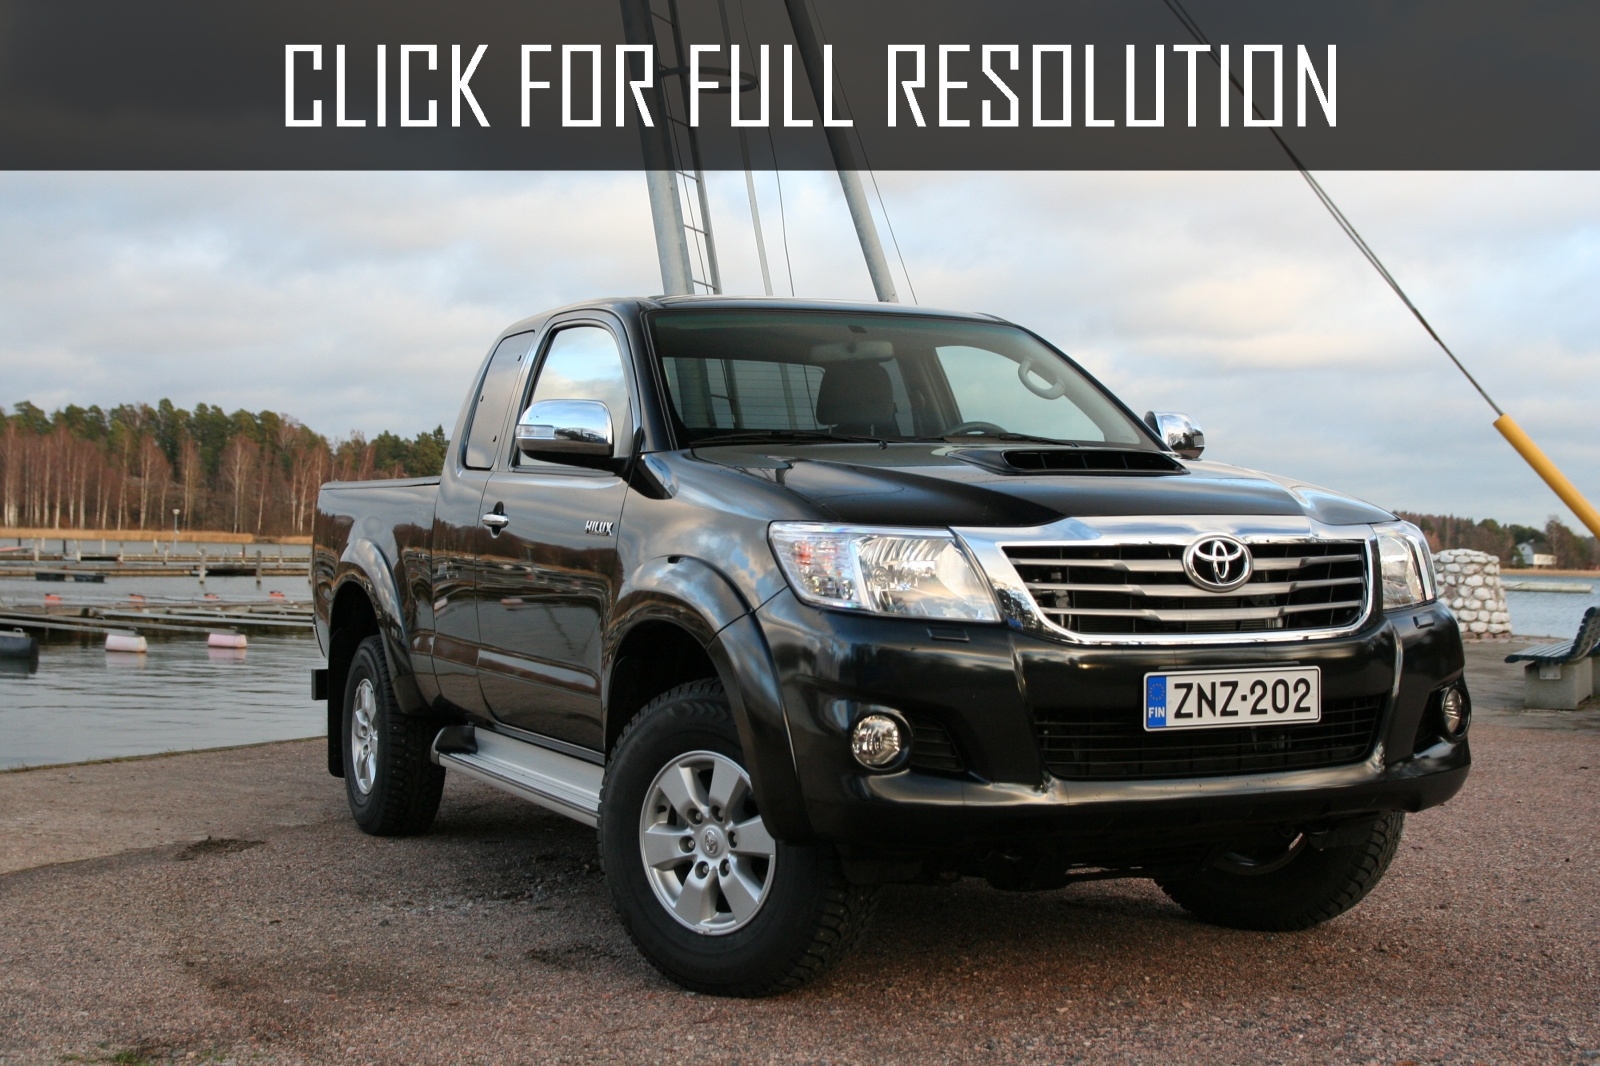 Toyota Hilux At